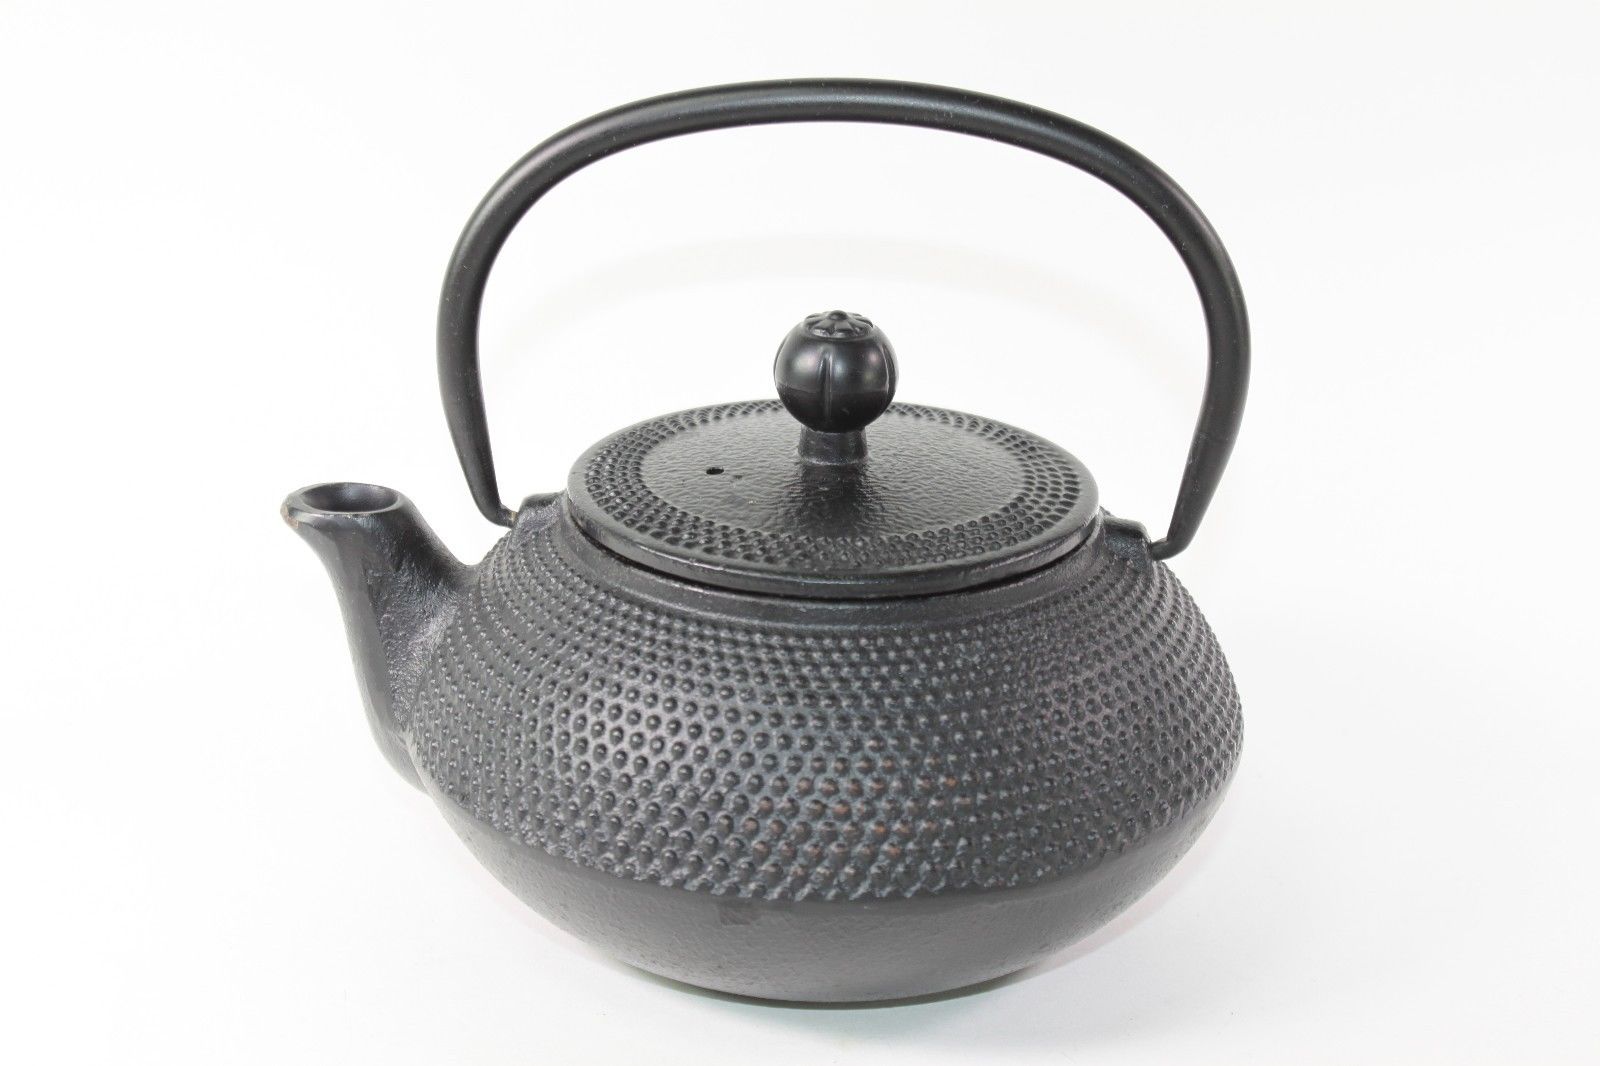 24 fl oz Black Small Dot Japanese Cast Iron Teapot Tetsubin with Infuser Filter - image 1 of 4